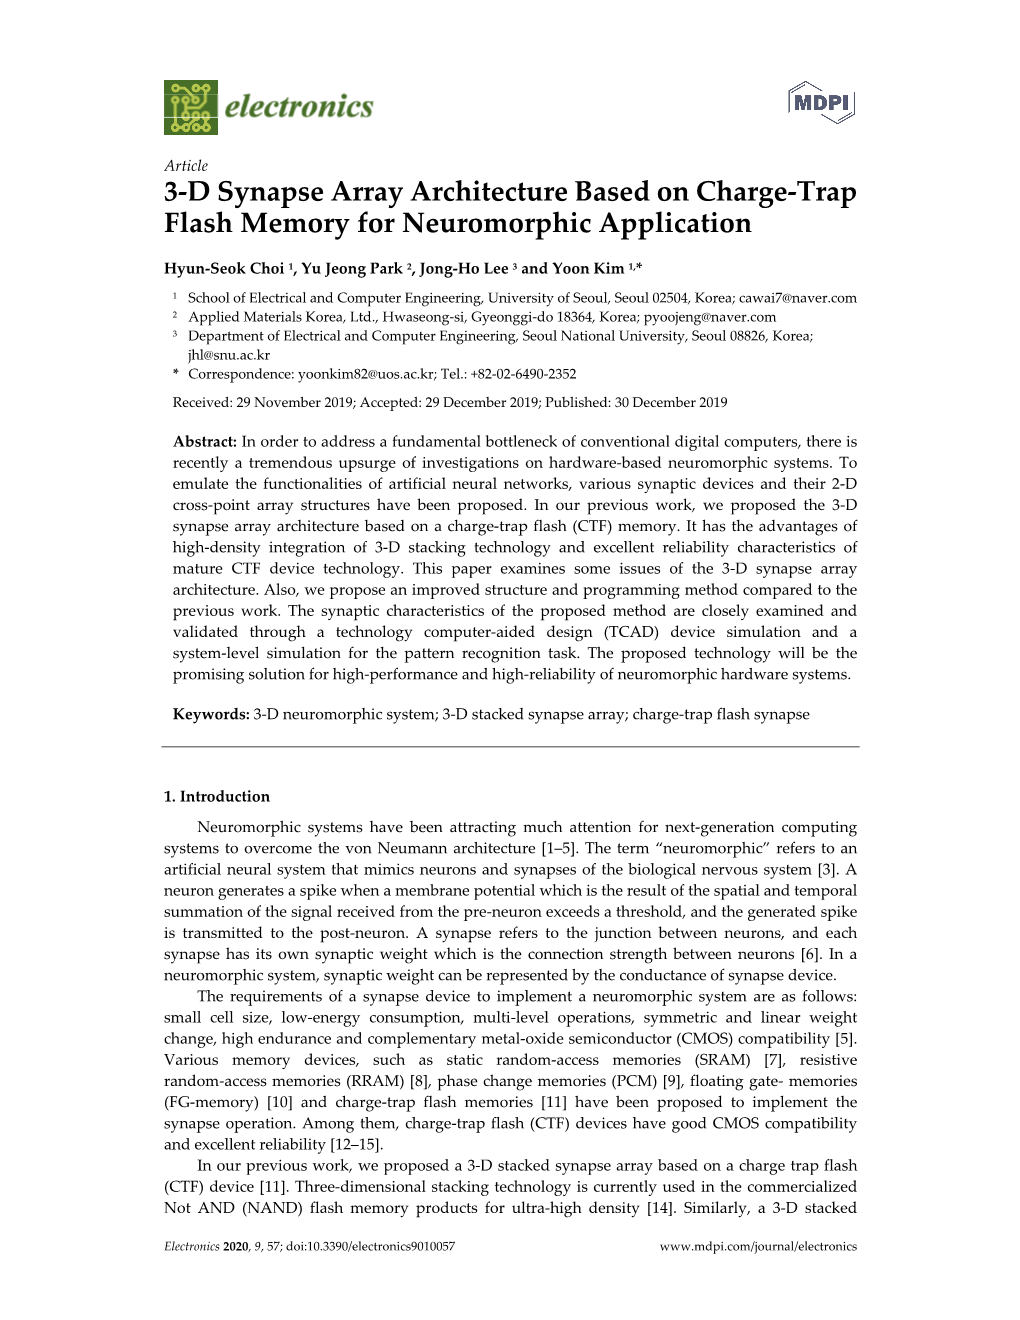 3-D Synapse Array Architecture Based on Charge-Trap Flash Memory For